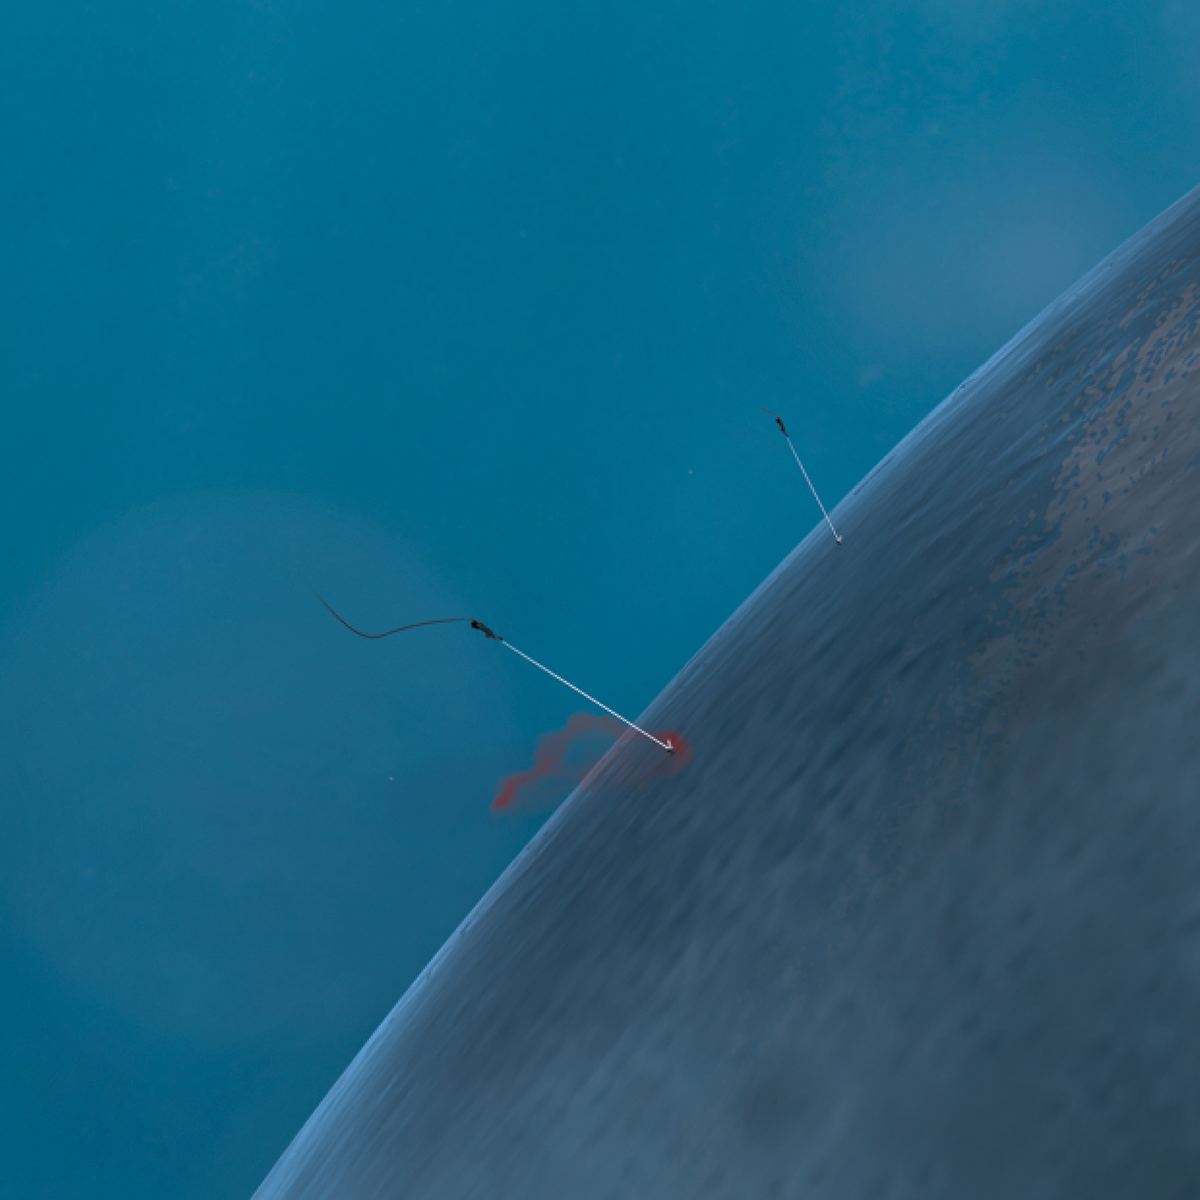 Harpoons piercing the whale